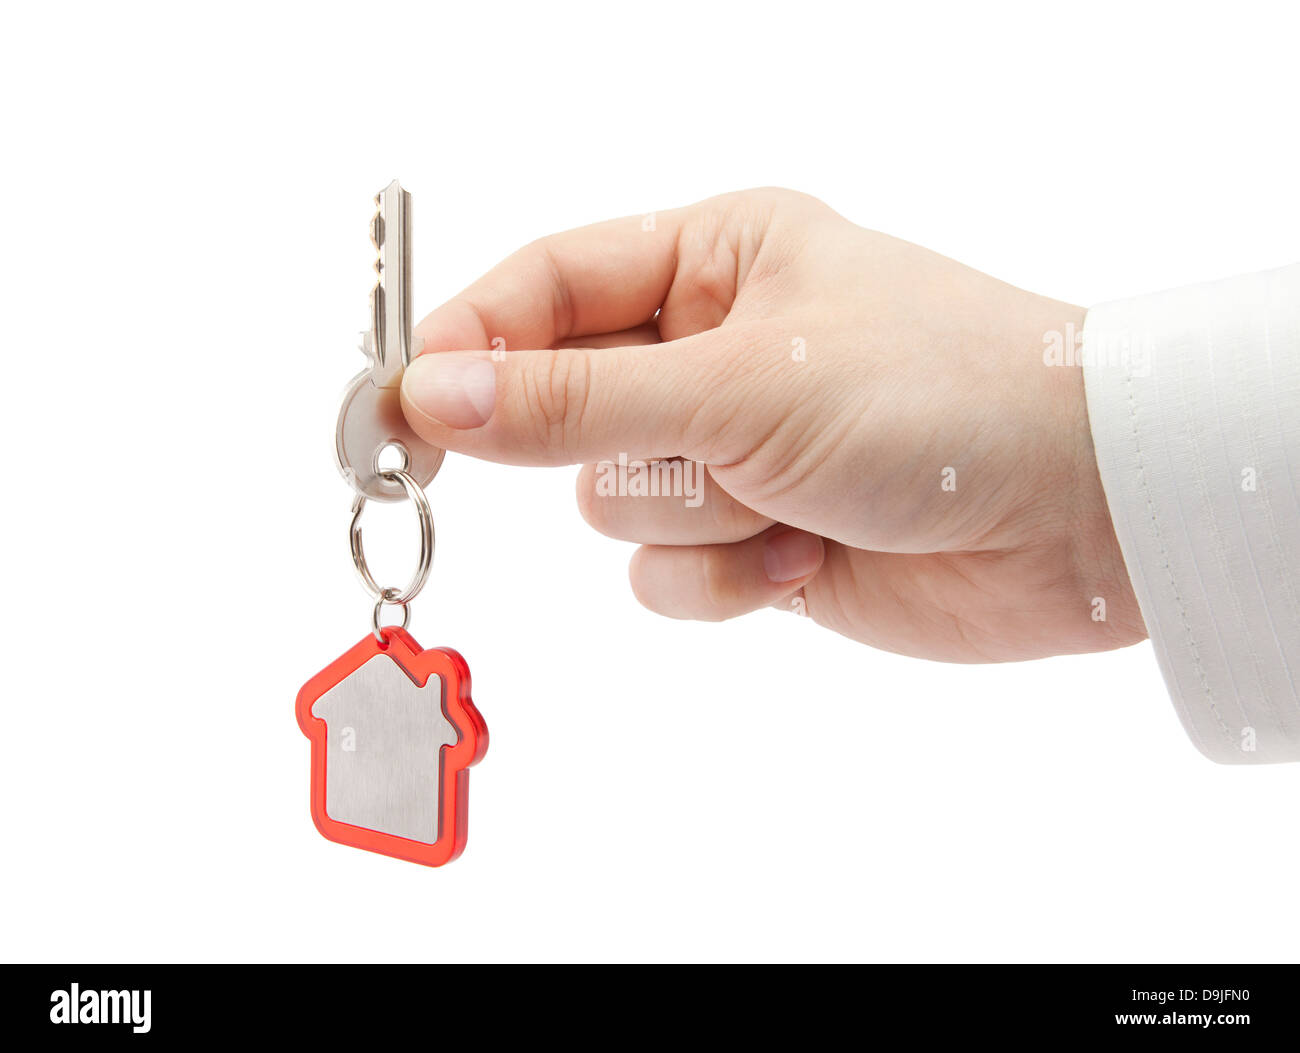 House key in hand with clipping path Stock Photo